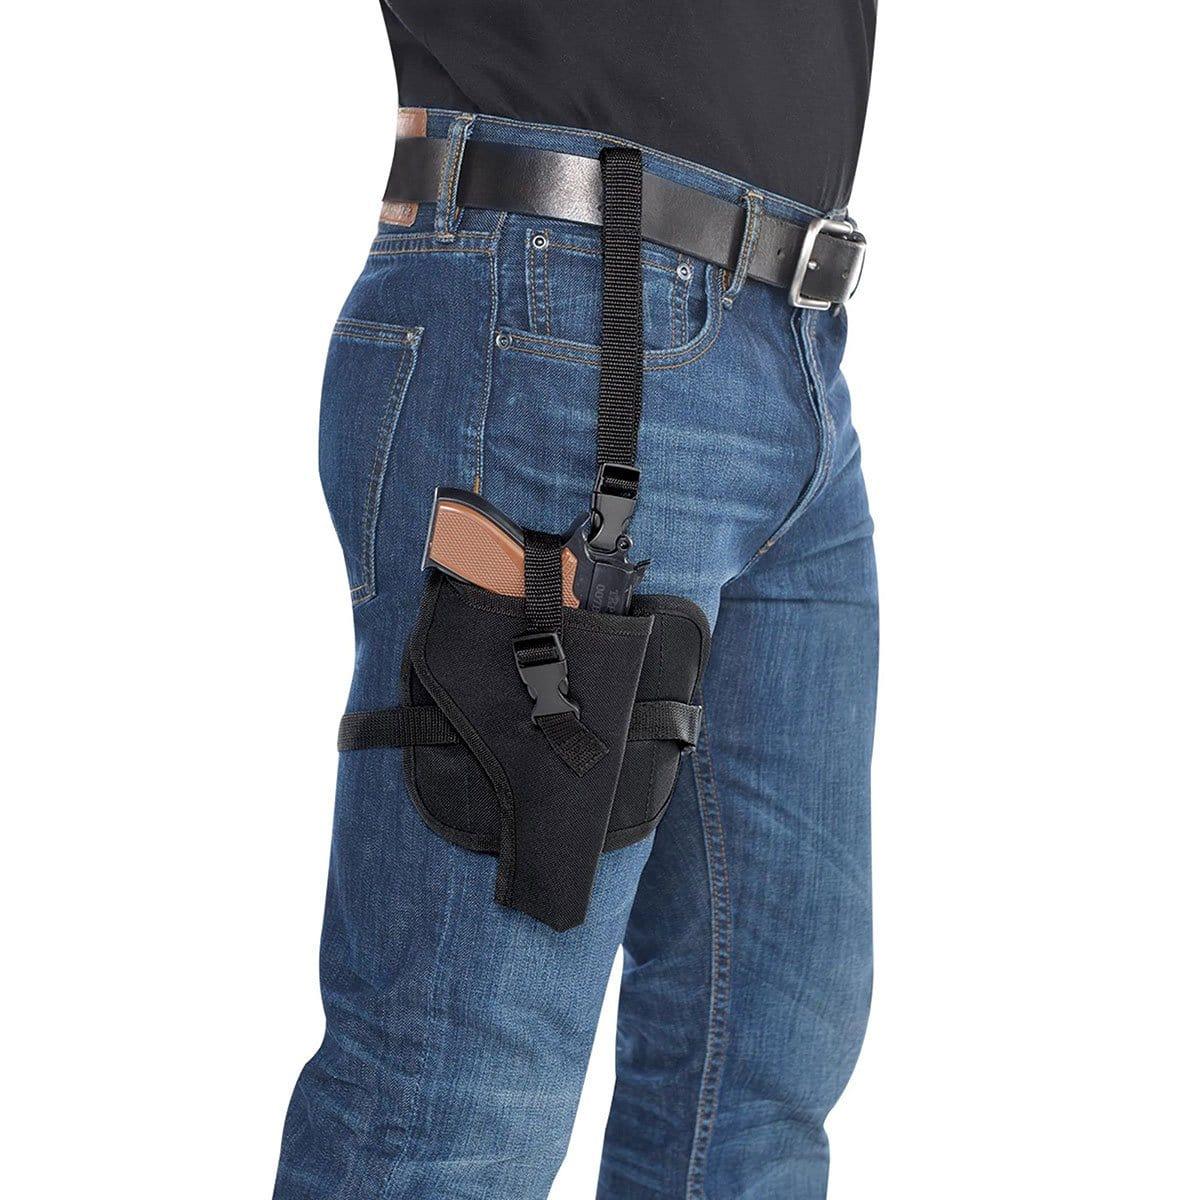 Buy Costume Accessories Deluxe Leg Holster sold at Party Expert